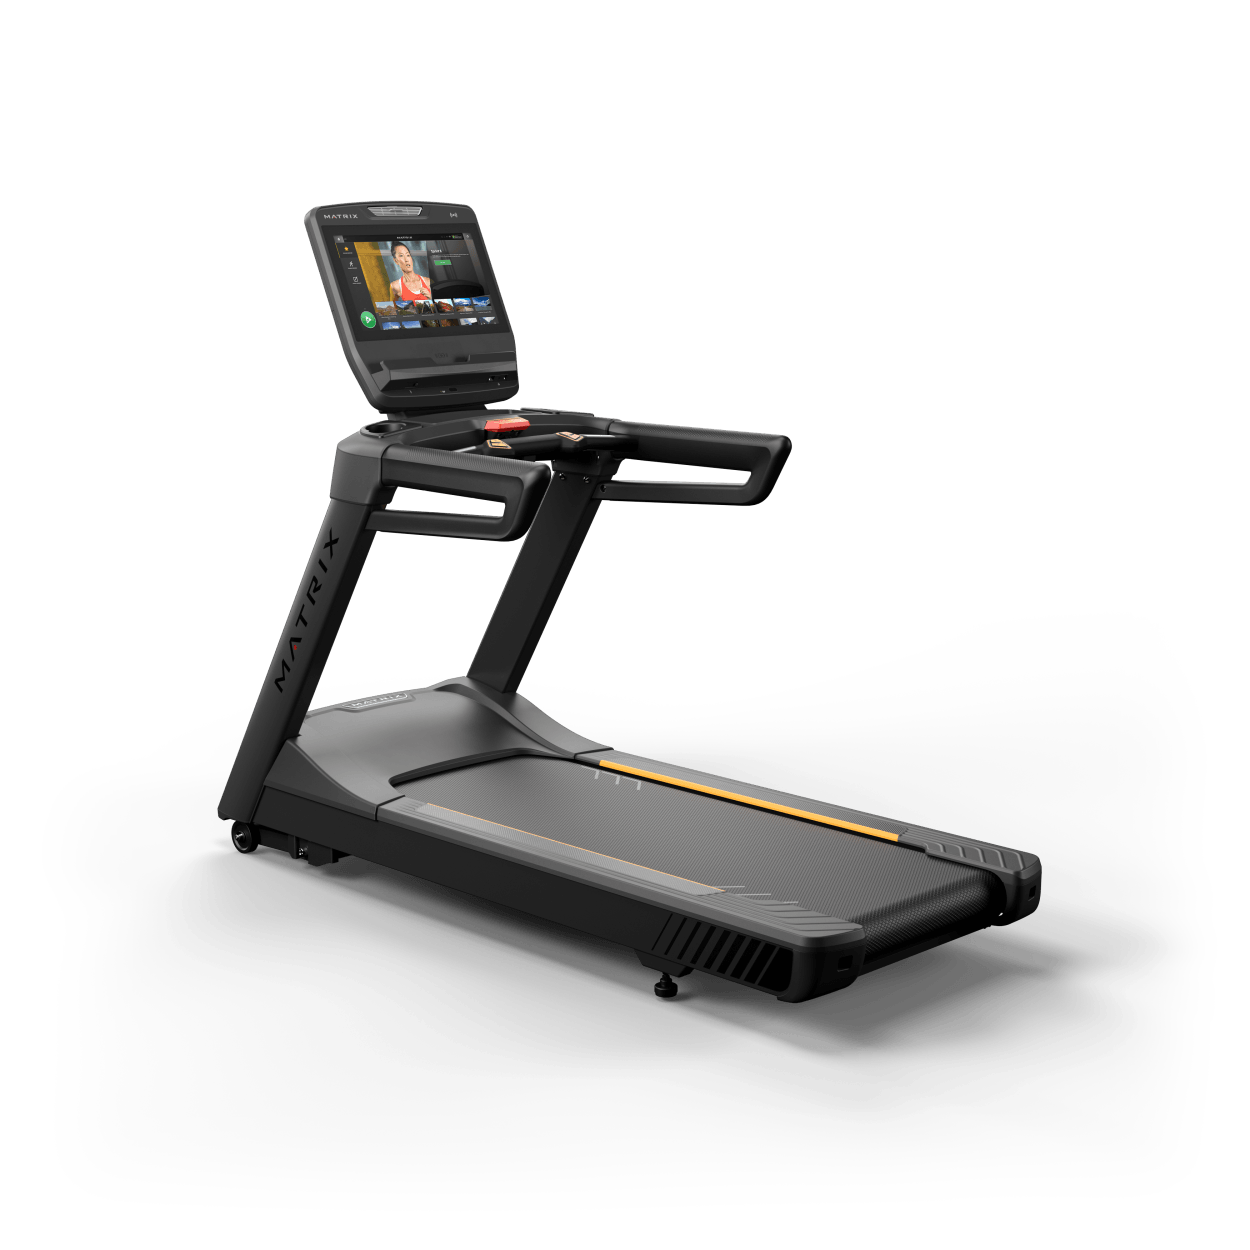 Matrix Fitness Matrix Fitness Endurance Treadmill with Touch XL Console full view | Fitness Experience